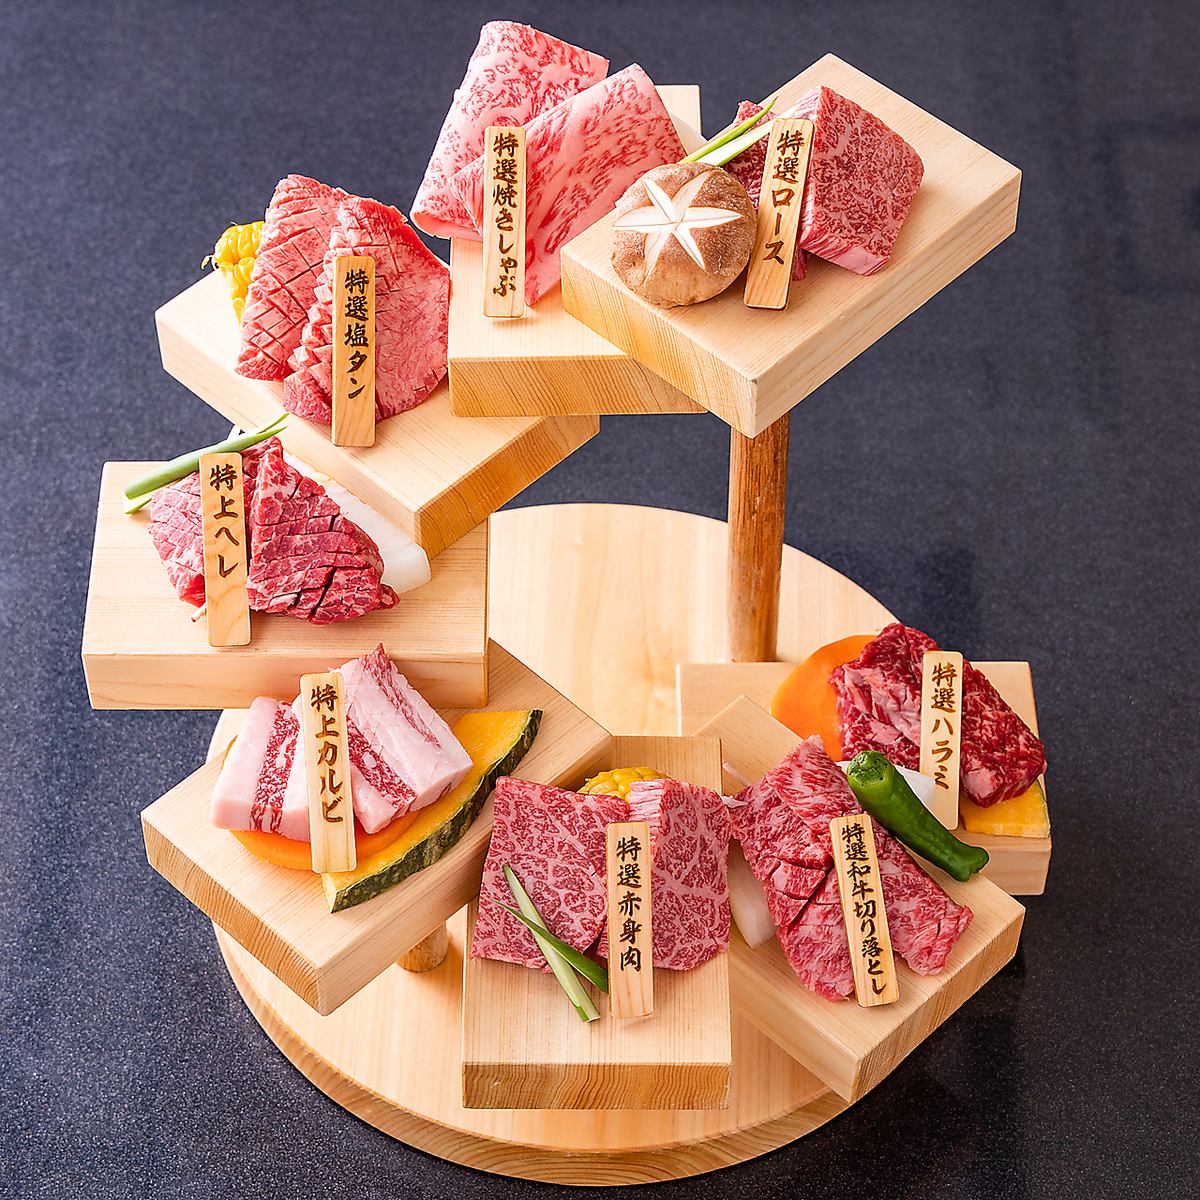 Celebrate with 8 tiers of one beef specialty meat and fireworks ◎You can bring your own cake!